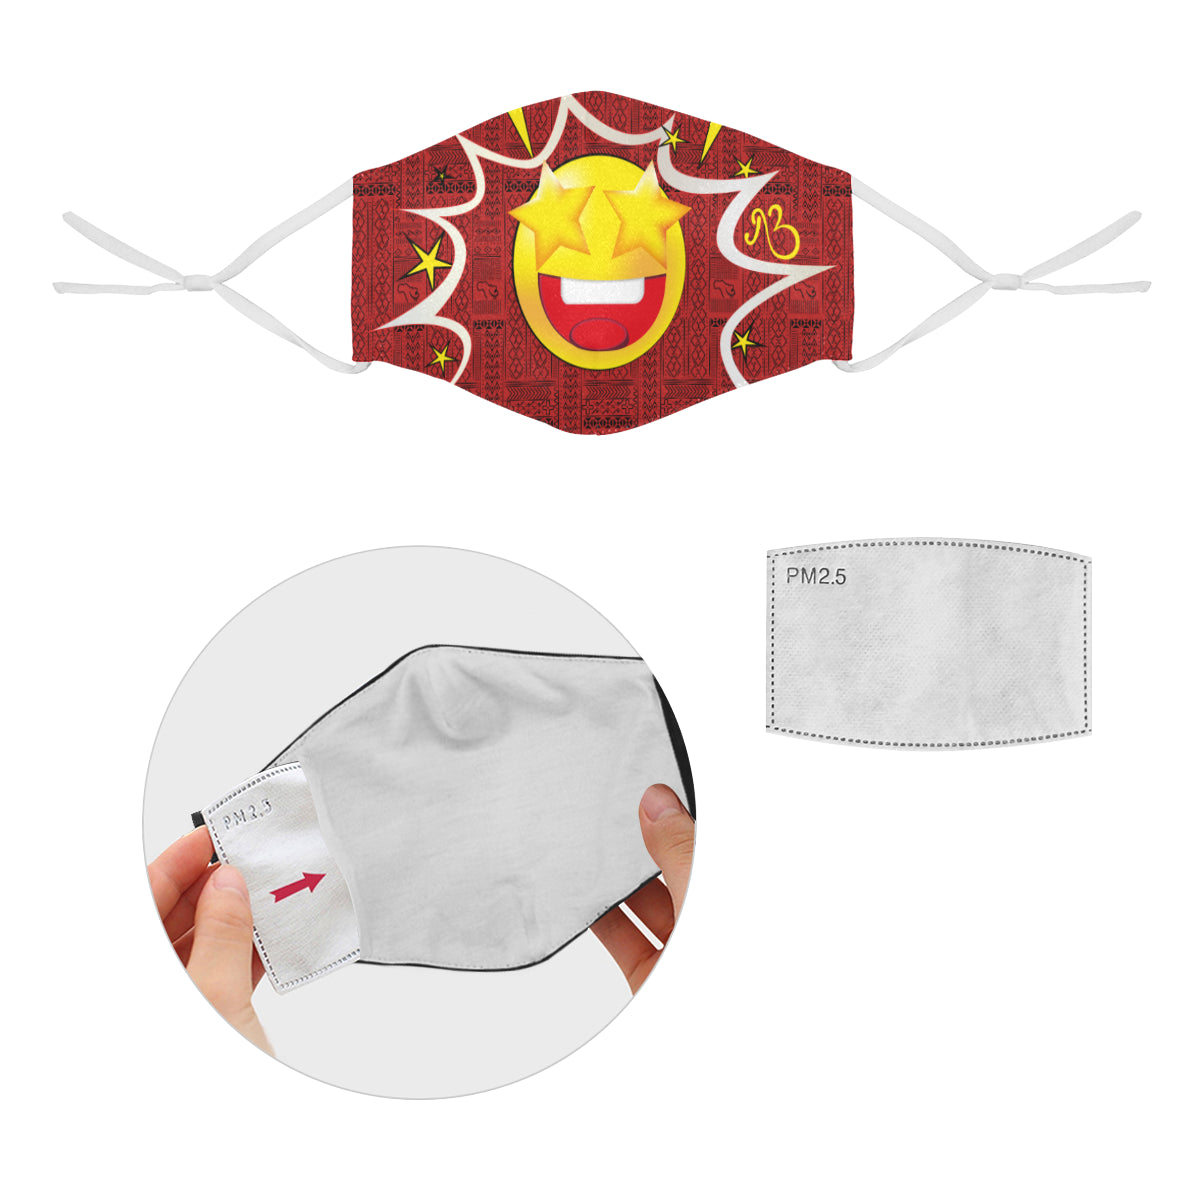 Star Tribal Print Comic Emoji Cotton Fabric Face Mask with Filter Slot and Adjustable Strap - Non-medical use (2 Filters Included)